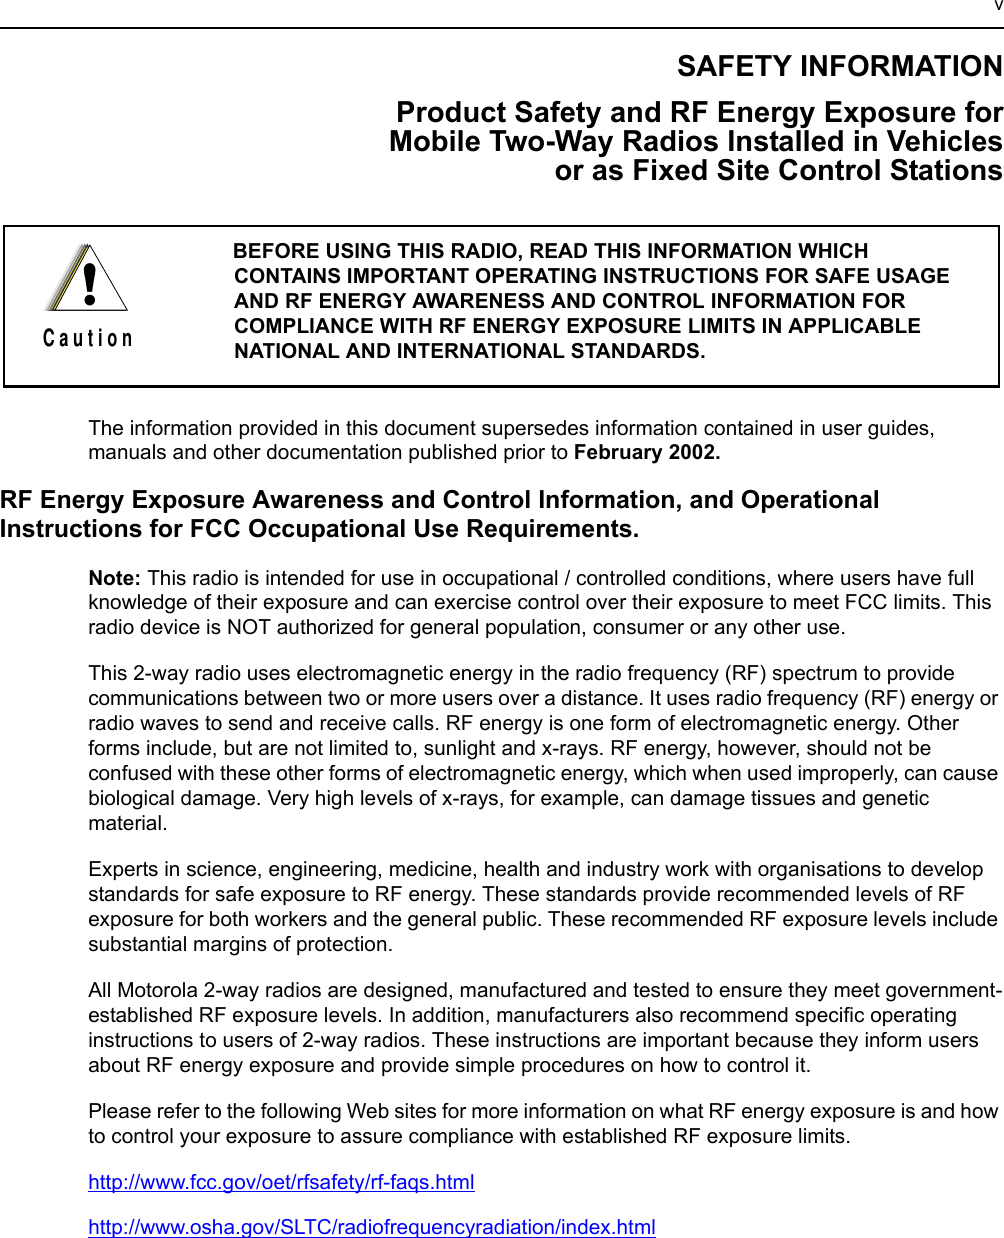 vSAFETY INFORMATIONProduct Safety and RF Energy Exposure for Mobile Two-Way Radios Installed in Vehicles or as Fixed Site Control StationsThe information provided in this document supersedes information contained in user guides, manuals and other documentation published prior to February 2002.RF Energy Exposure Awareness and Control Information, and Operational Instructions for FCC Occupational Use Requirements.Note: This radio is intended for use in occupational / controlled conditions, where users have full knowledge of their exposure and can exercise control over their exposure to meet FCC limits. This radio device is NOT authorized for general population, consumer or any other use.This 2-way radio uses electromagnetic energy in the radio frequency (RF) spectrum to provide communications between two or more users over a distance. It uses radio frequency (RF) energy or radio waves to send and receive calls. RF energy is one form of electromagnetic energy. Other forms include, but are not limited to, sunlight and x-rays. RF energy, however, should not be confused with these other forms of electromagnetic energy, which when used improperly, can cause biological damage. Very high levels of x-rays, for example, can damage tissues and genetic material. Experts in science, engineering, medicine, health and industry work with organisations to develop standards for safe exposure to RF energy. These standards provide recommended levels of RF exposure for both workers and the general public. These recommended RF exposure levels include substantial margins of protection.All Motorola 2-way radios are designed, manufactured and tested to ensure they meet government-established RF exposure levels. In addition, manufacturers also recommend specific operating instructions to users of 2-way radios. These instructions are important because they inform users about RF energy exposure and provide simple procedures on how to control it.Please refer to the following Web sites for more information on what RF energy exposure is and how to control your exposure to assure compliance with established RF exposure limits.http://www.fcc.gov/oet/rfsafety/rf-faqs.htmlhttp://www.osha.gov/SLTC/radiofrequencyradiation/index.htmlBEFORE USING THIS RADIO, READ THIS INFORMATION WHICH CONTAINS IMPORTANT OPERATING INSTRUCTIONS FOR SAFE USAGE AND RF ENERGY AWARENESS AND CONTROL INFORMATION FOR COMPLIANCE WITH RF ENERGY EXPOSURE LIMITS IN APPLICABLE NATIONAL AND INTERNATIONAL STANDARDS. !C a u t i o n